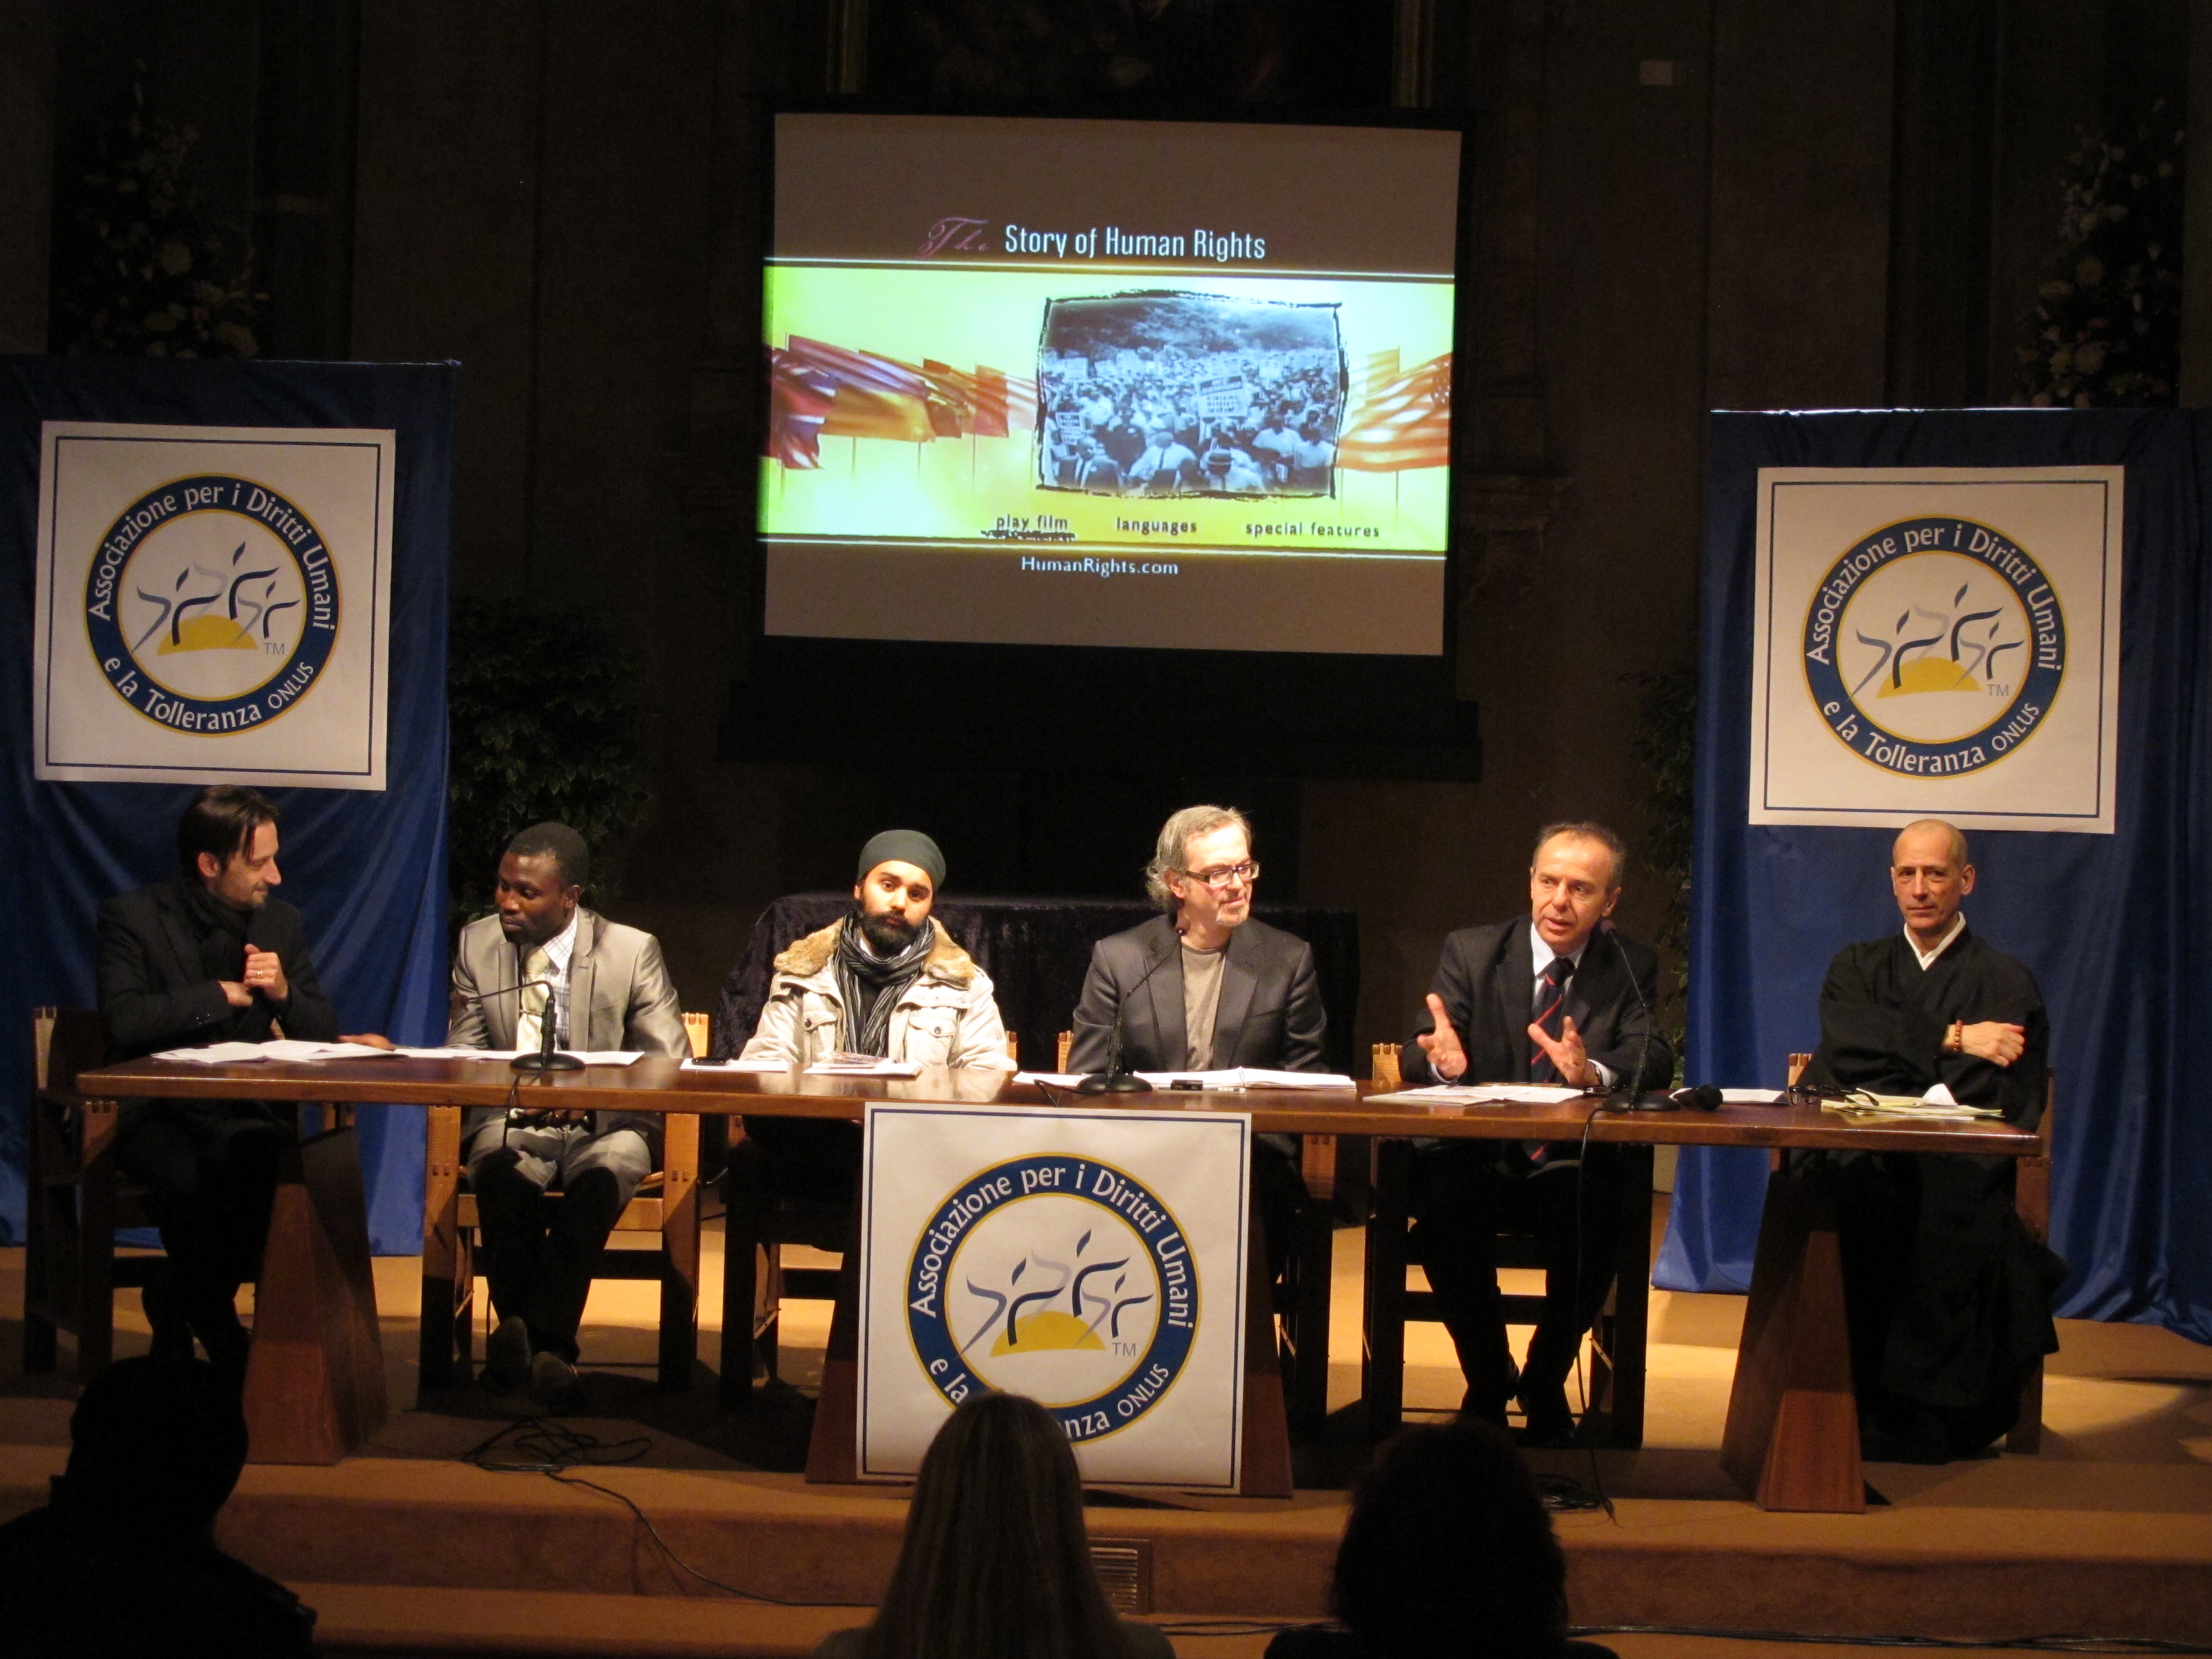 Religious leaders participated in a panel discussion in Brescia, Italy, December 18, 2013, at a Human Rights Day conference hosted by the Association for Human Rights and Tolerance.